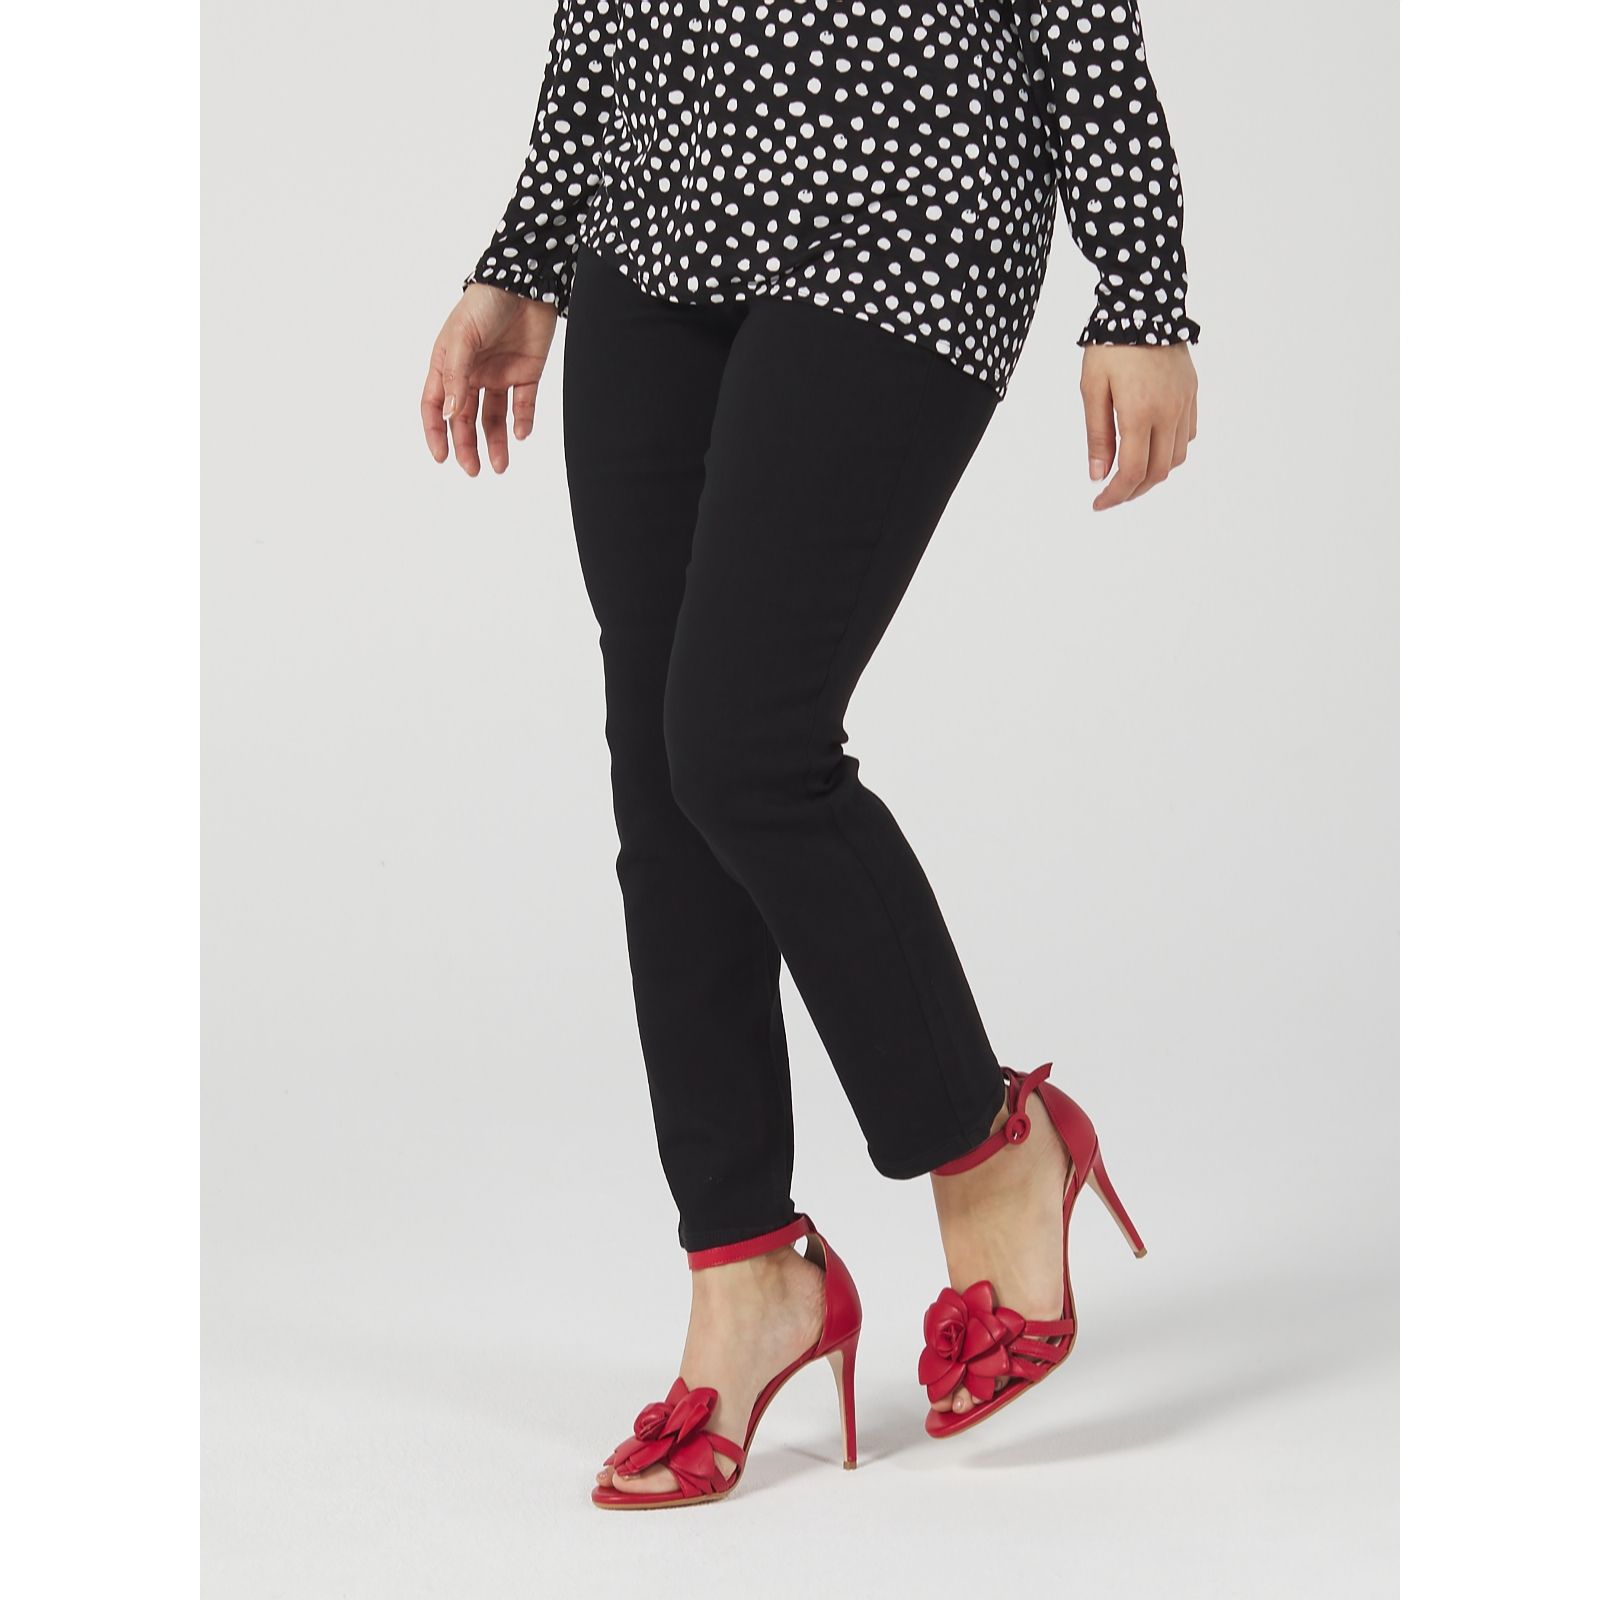 Dannii Minogue High Waisted Pull On Stretch Jeans Petite - QVC UK